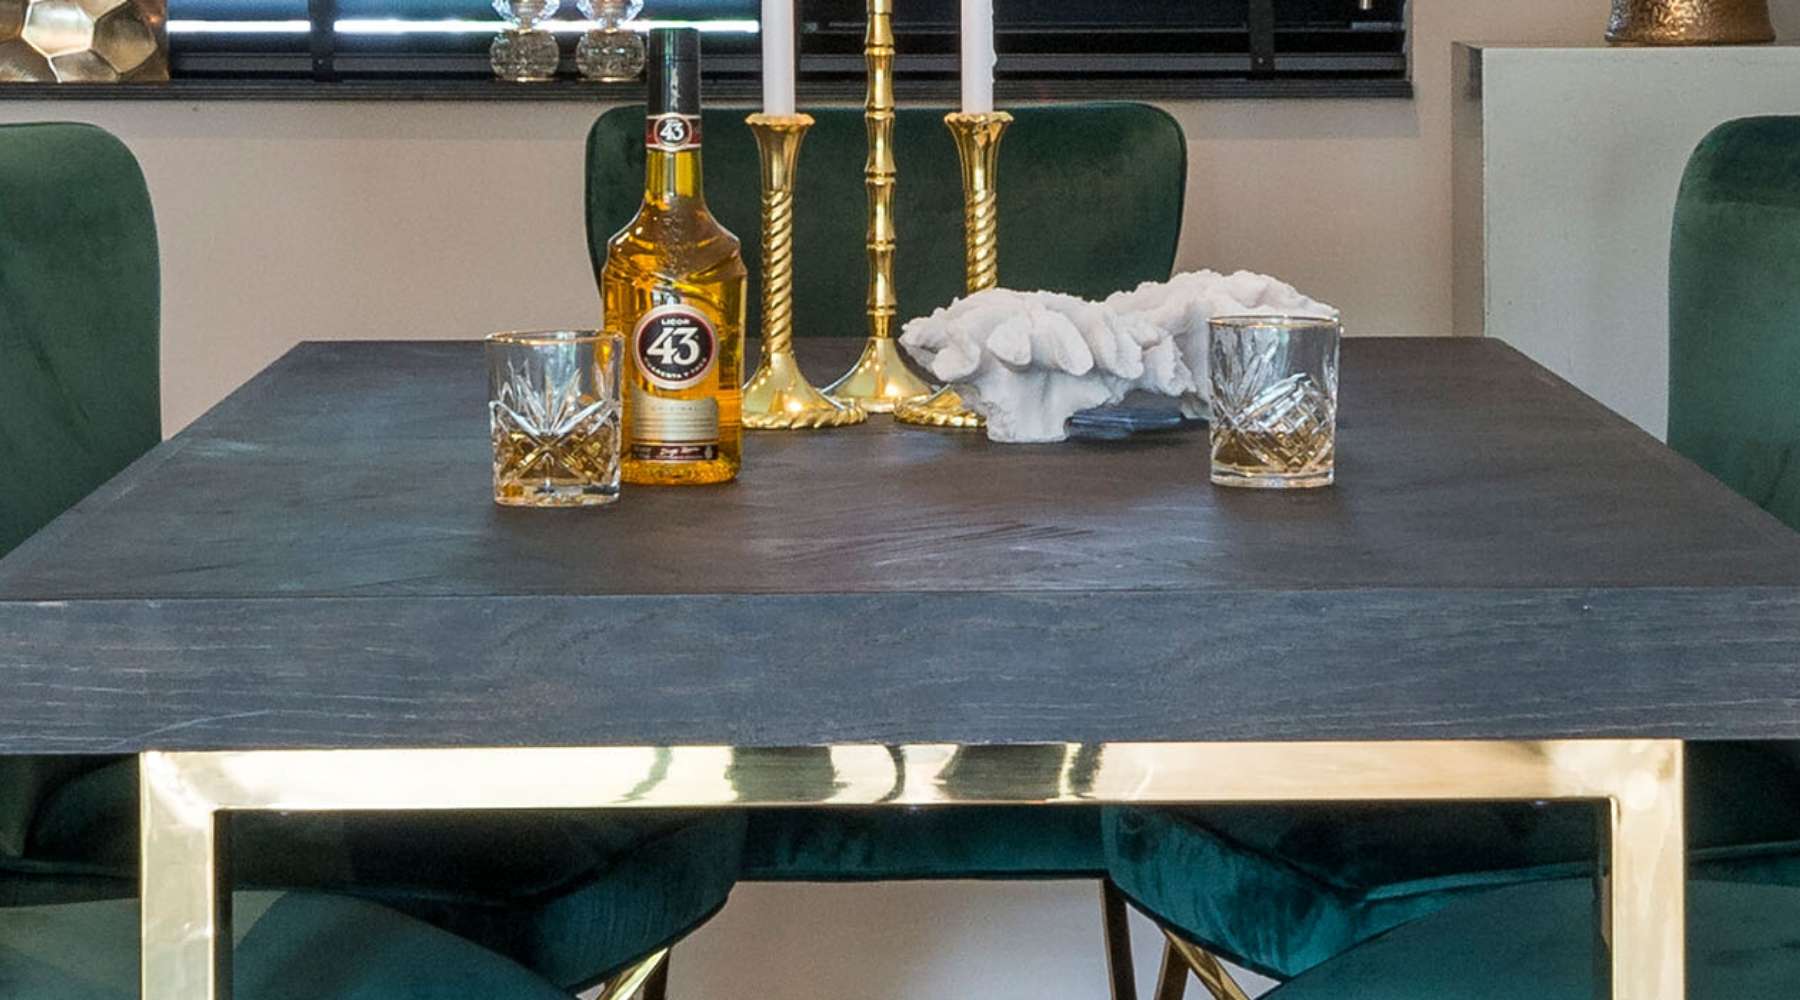 wood dining table with gold candlesticks